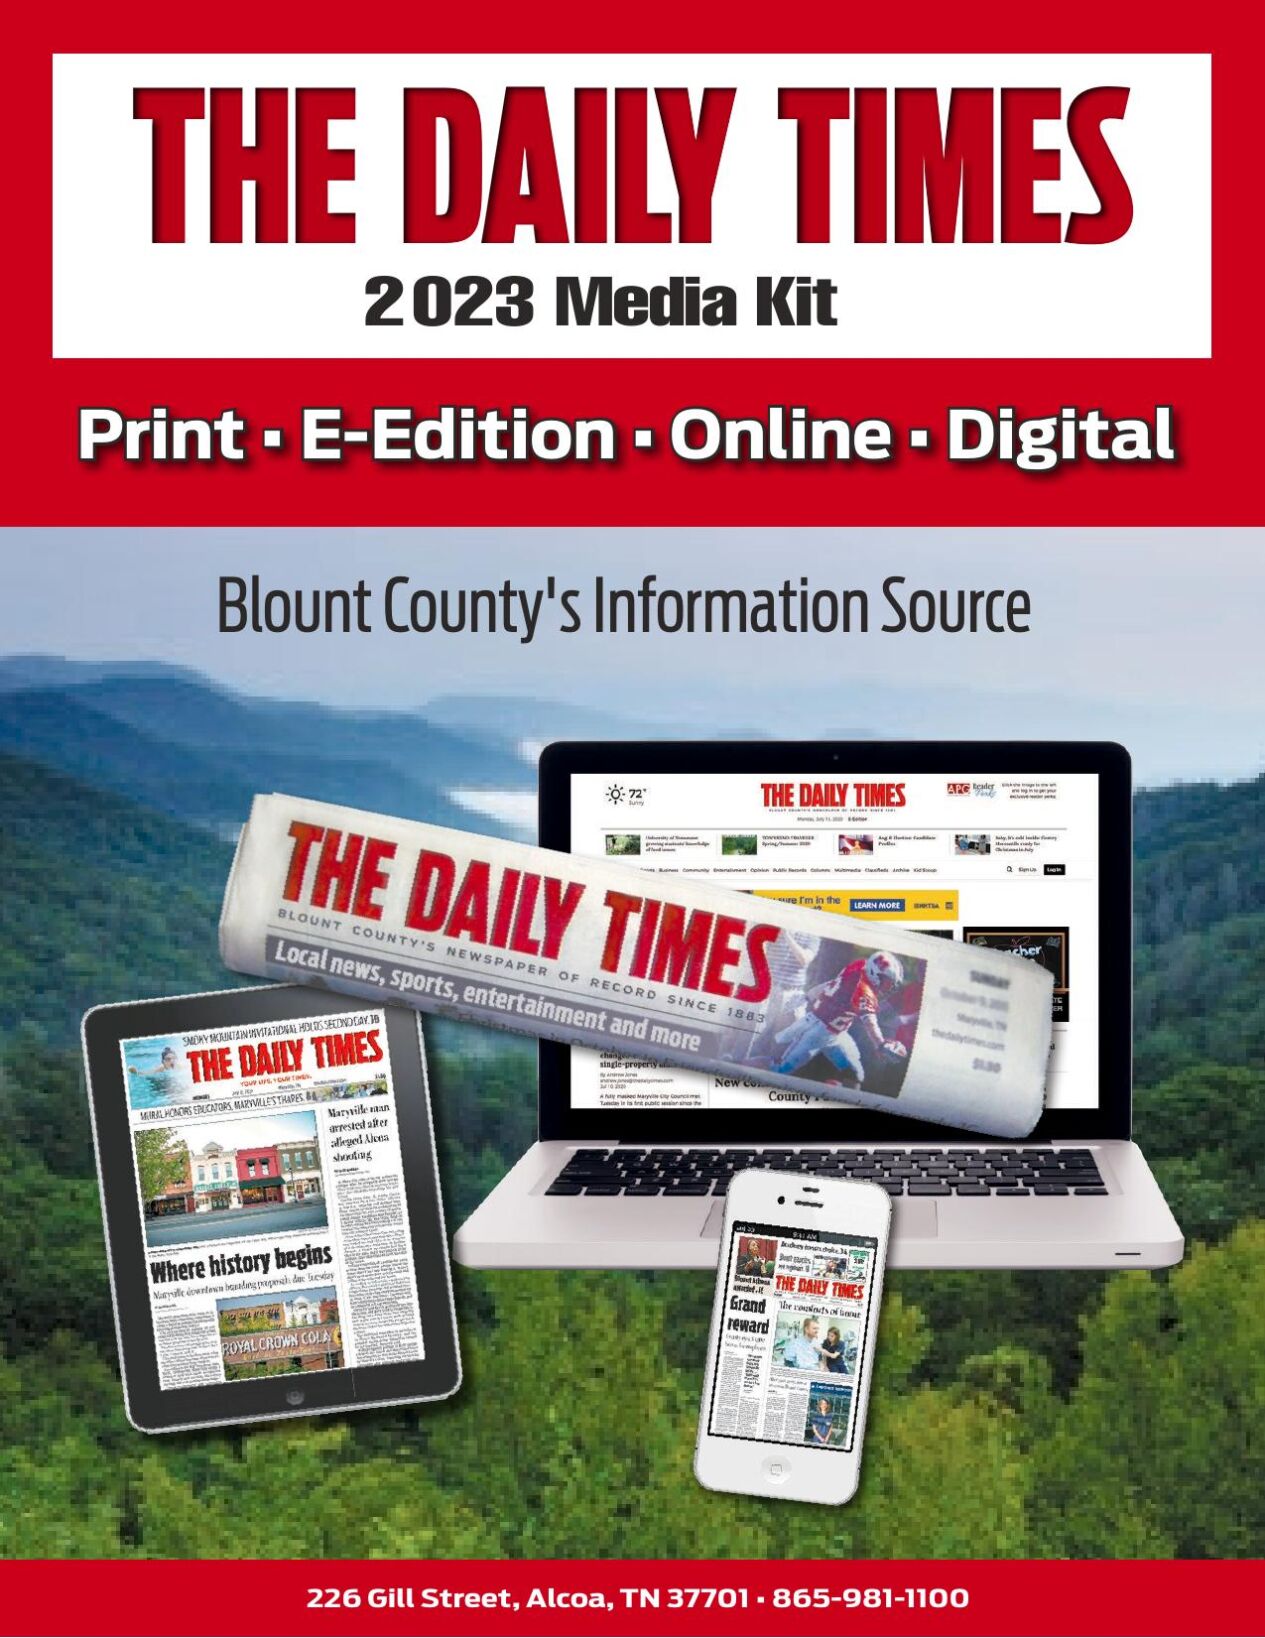 The Daily Times Media Kit